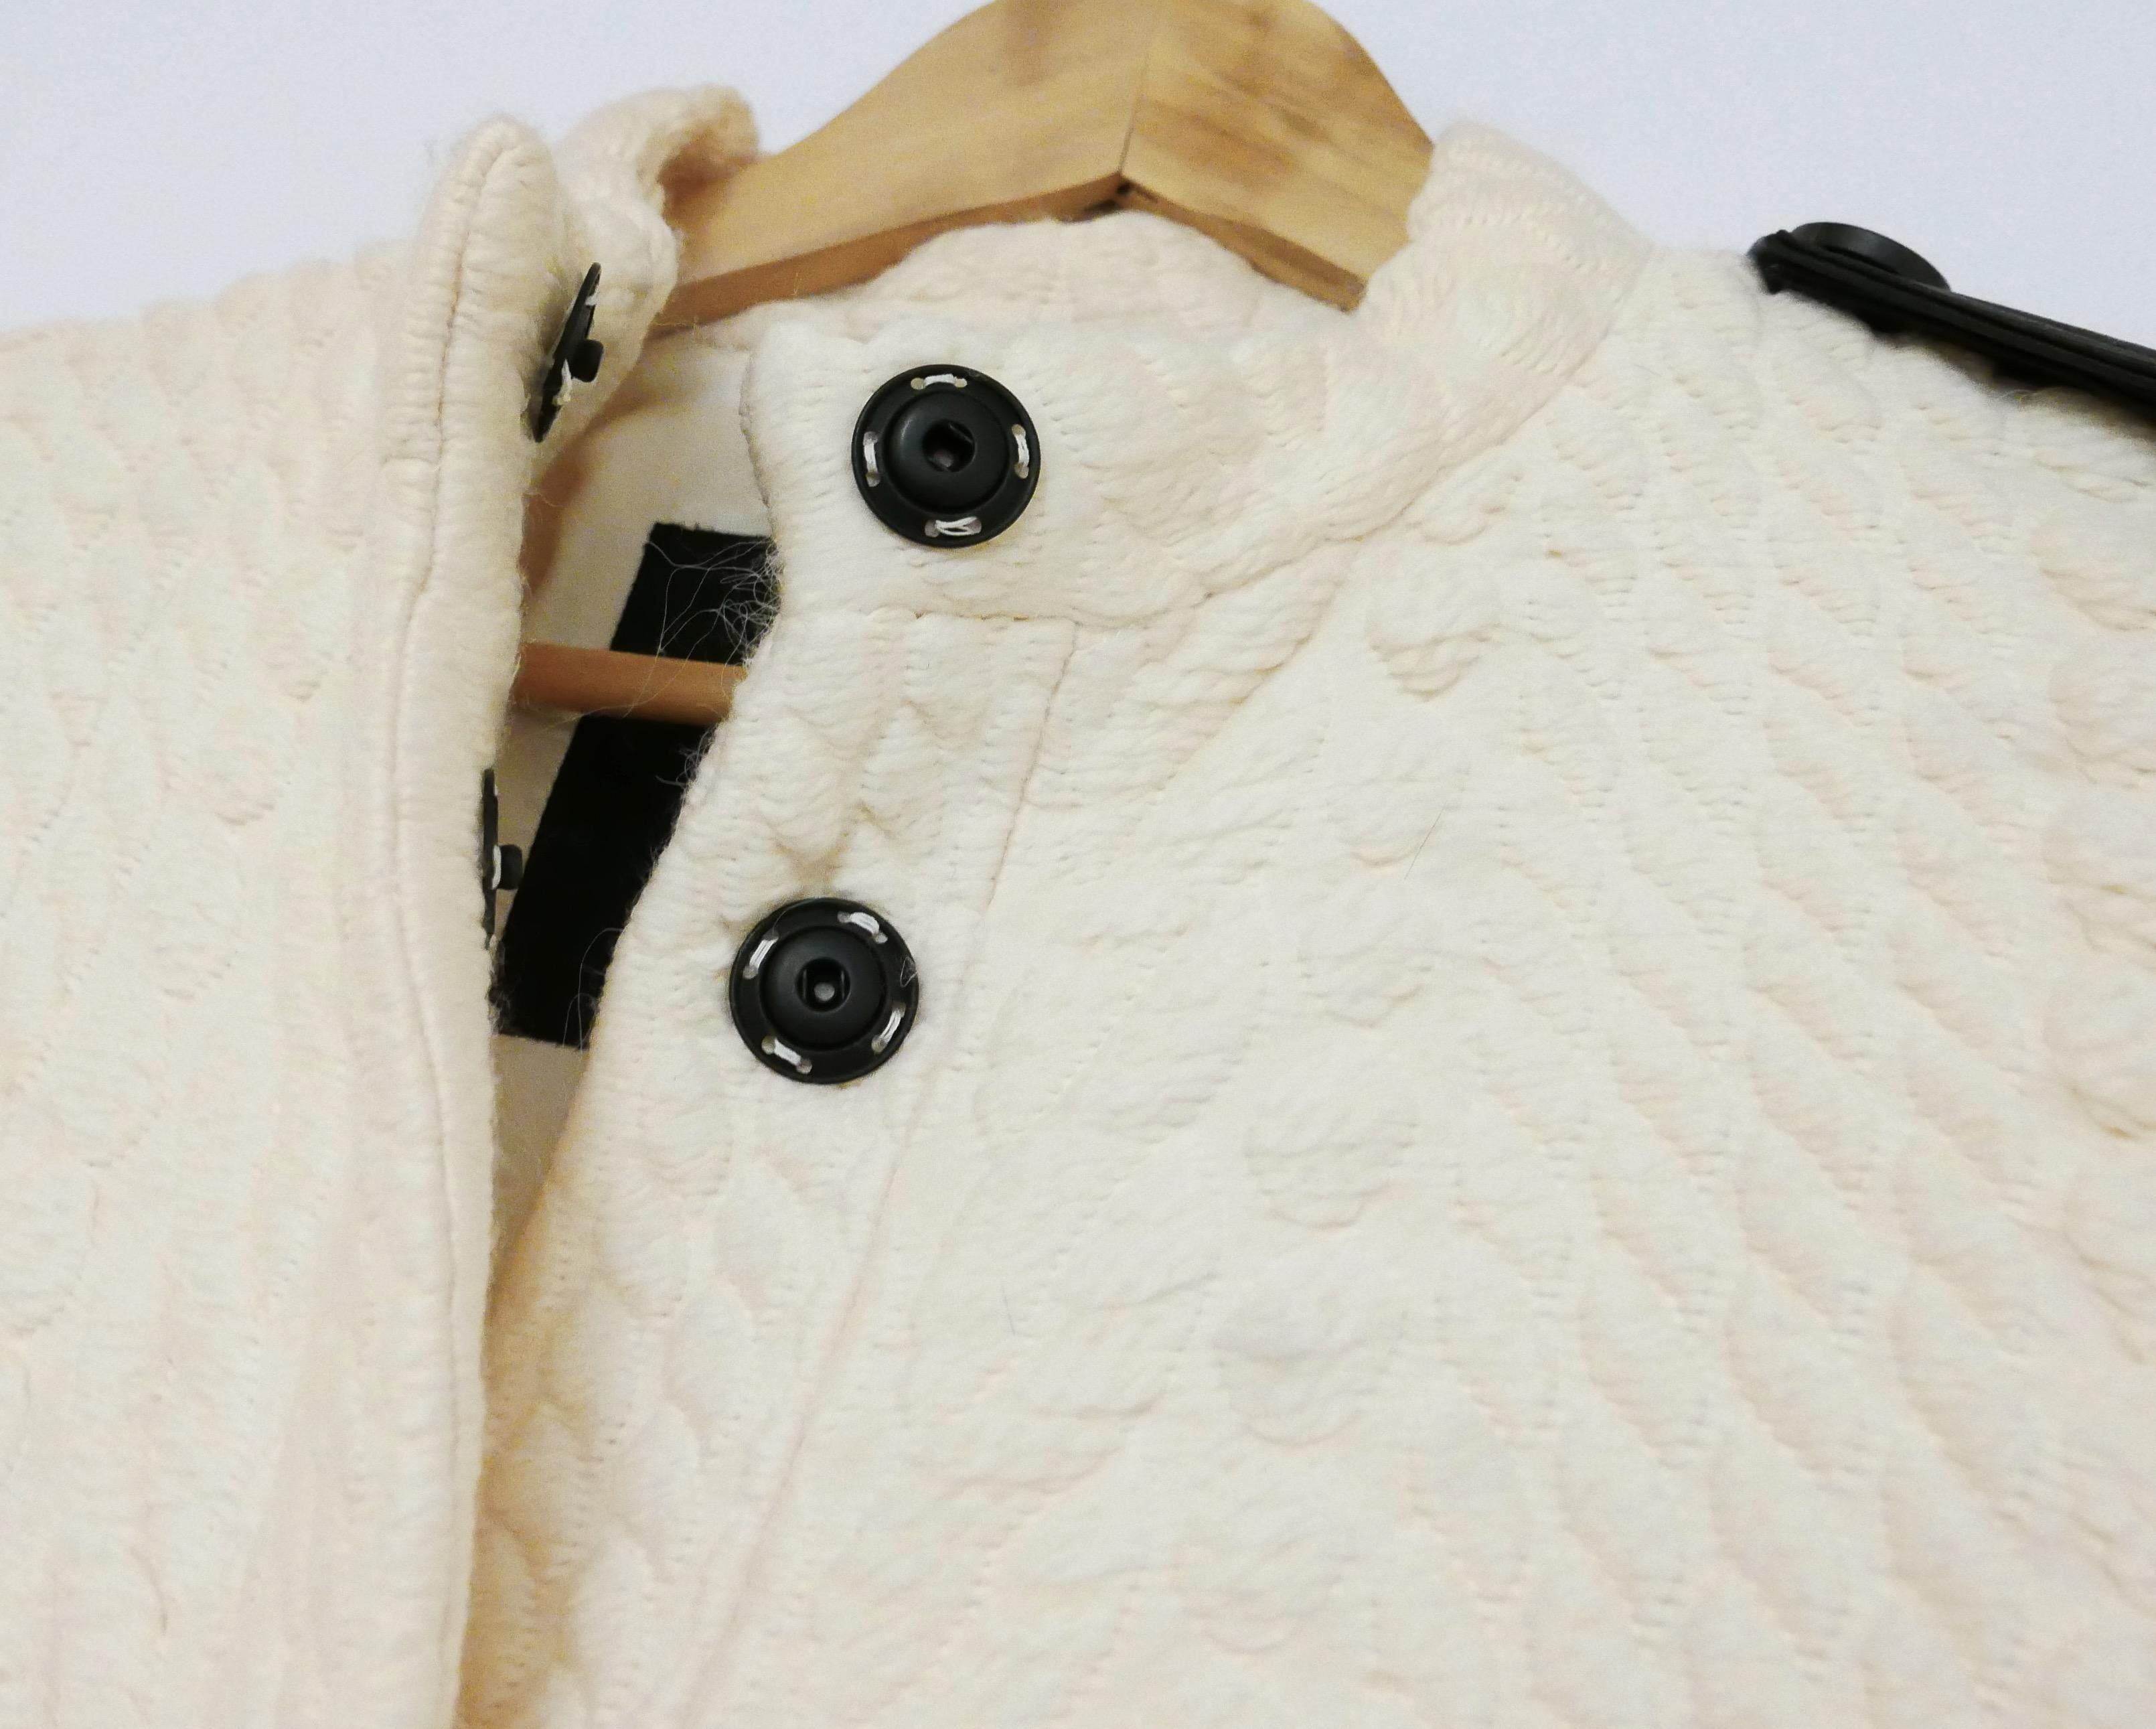 Amazing Burberry AW11 coat - this also featured in the Ad campaign. 

Bought for £2200 and new with Net-A-Porter tag attached. 

Made from thick cream wool with a gorgeous textured and detailed cable knit pattern throughout. 
It has slim fit through